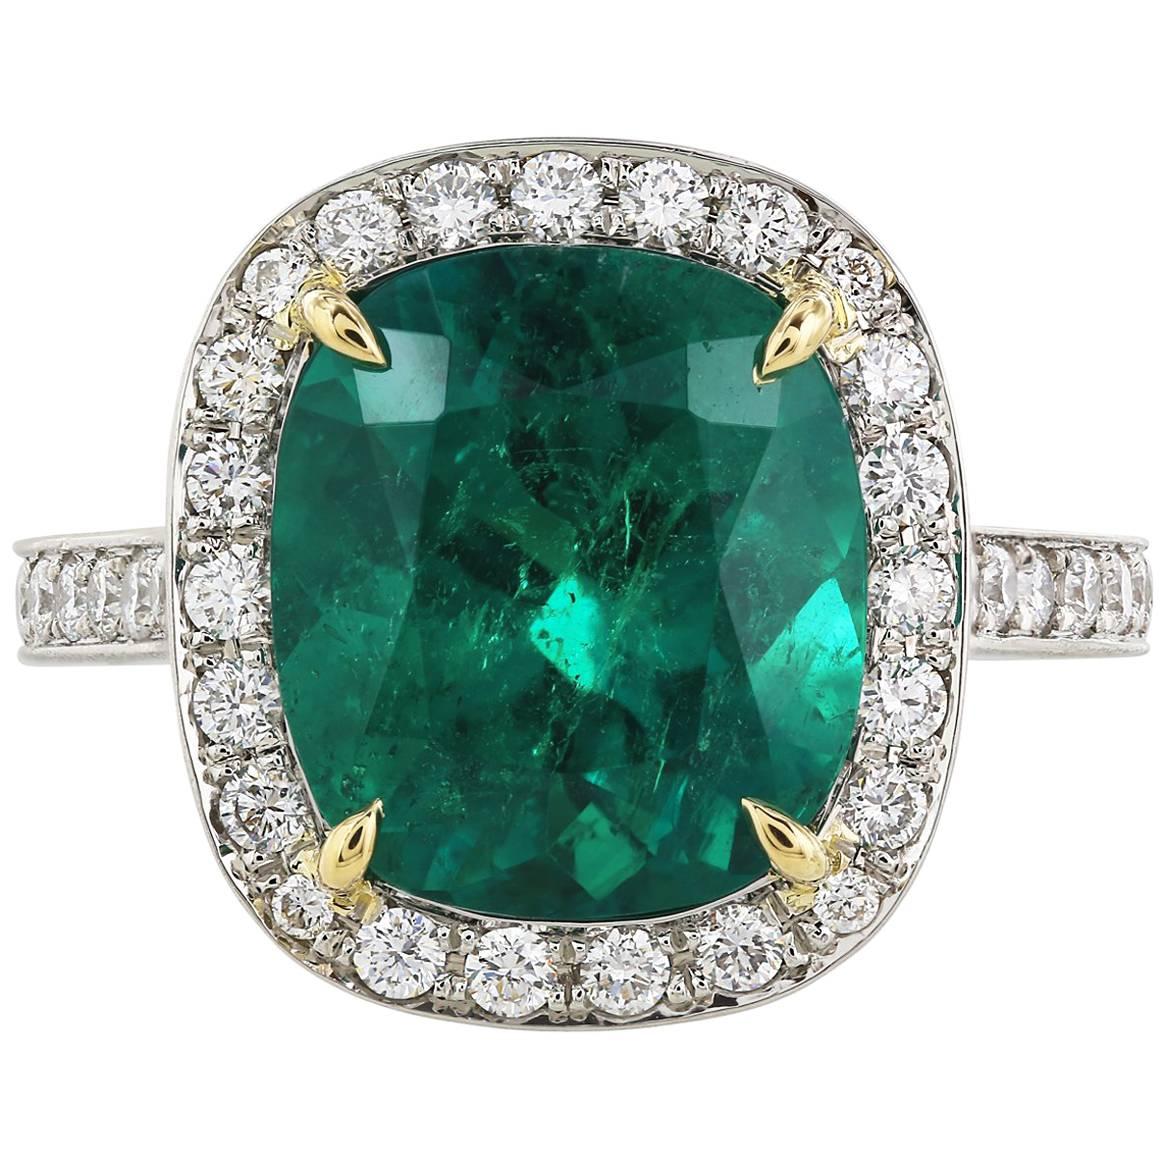 C. Dunaigre Certified 4.27 Carat Colombian Emerald Ring For Sale